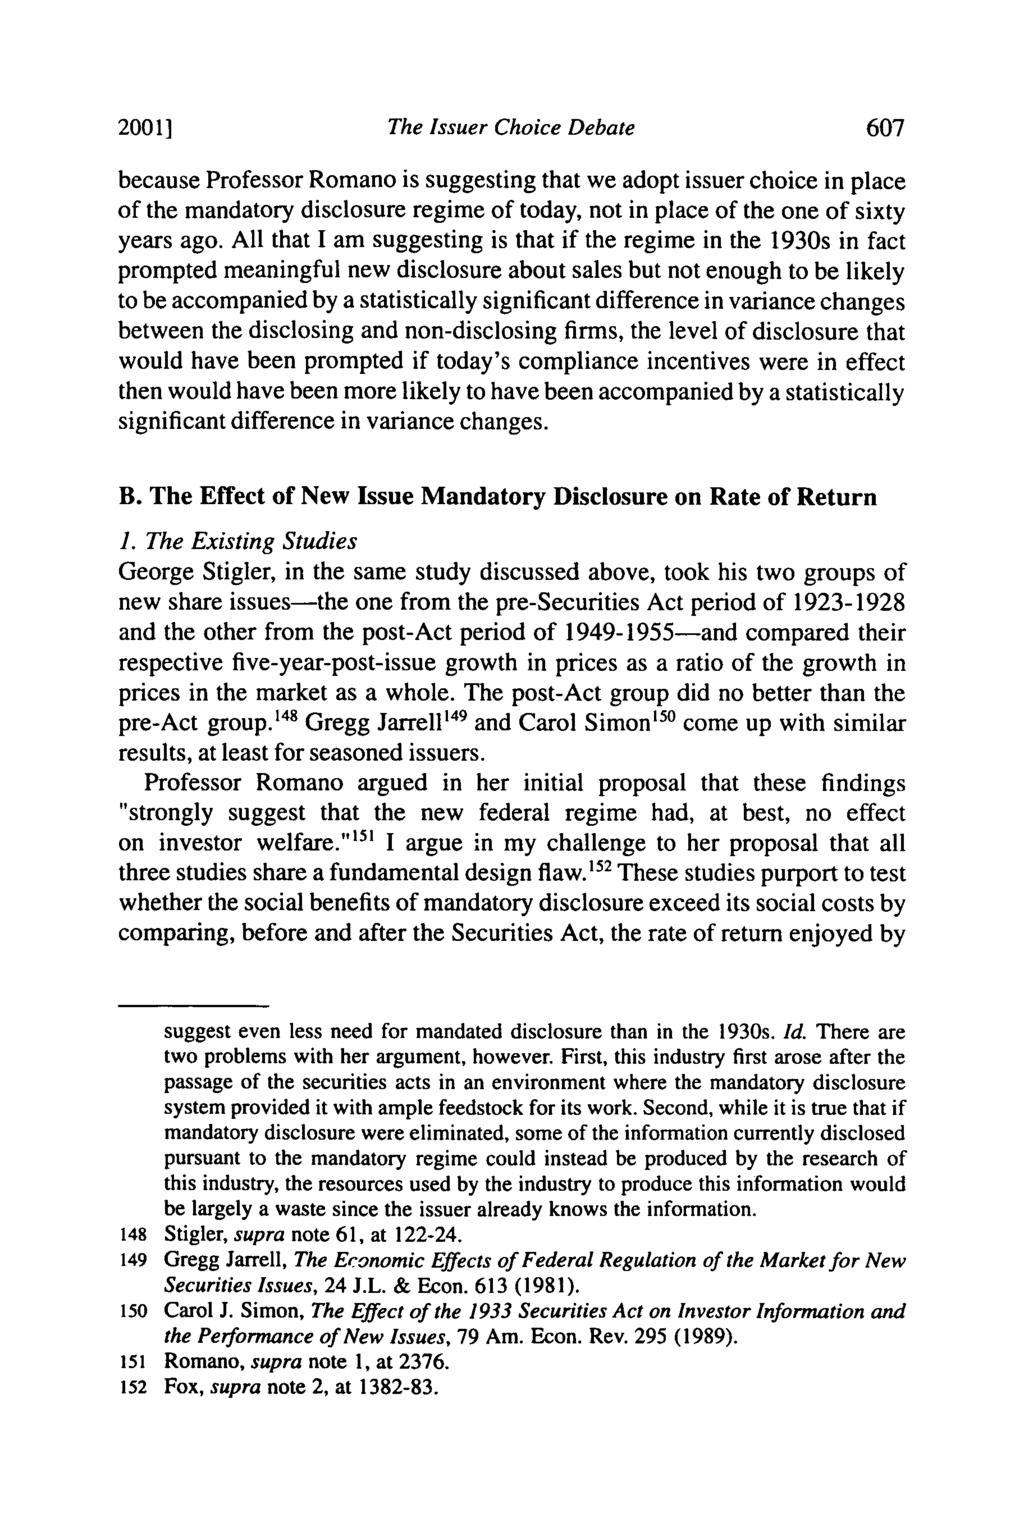 2001] The Issuer Choice Debate because Professor Romano is suggesting that we adopt issuer choice in place of the mandatory disclosure regime of today, not in place of the one of sixty years ago.